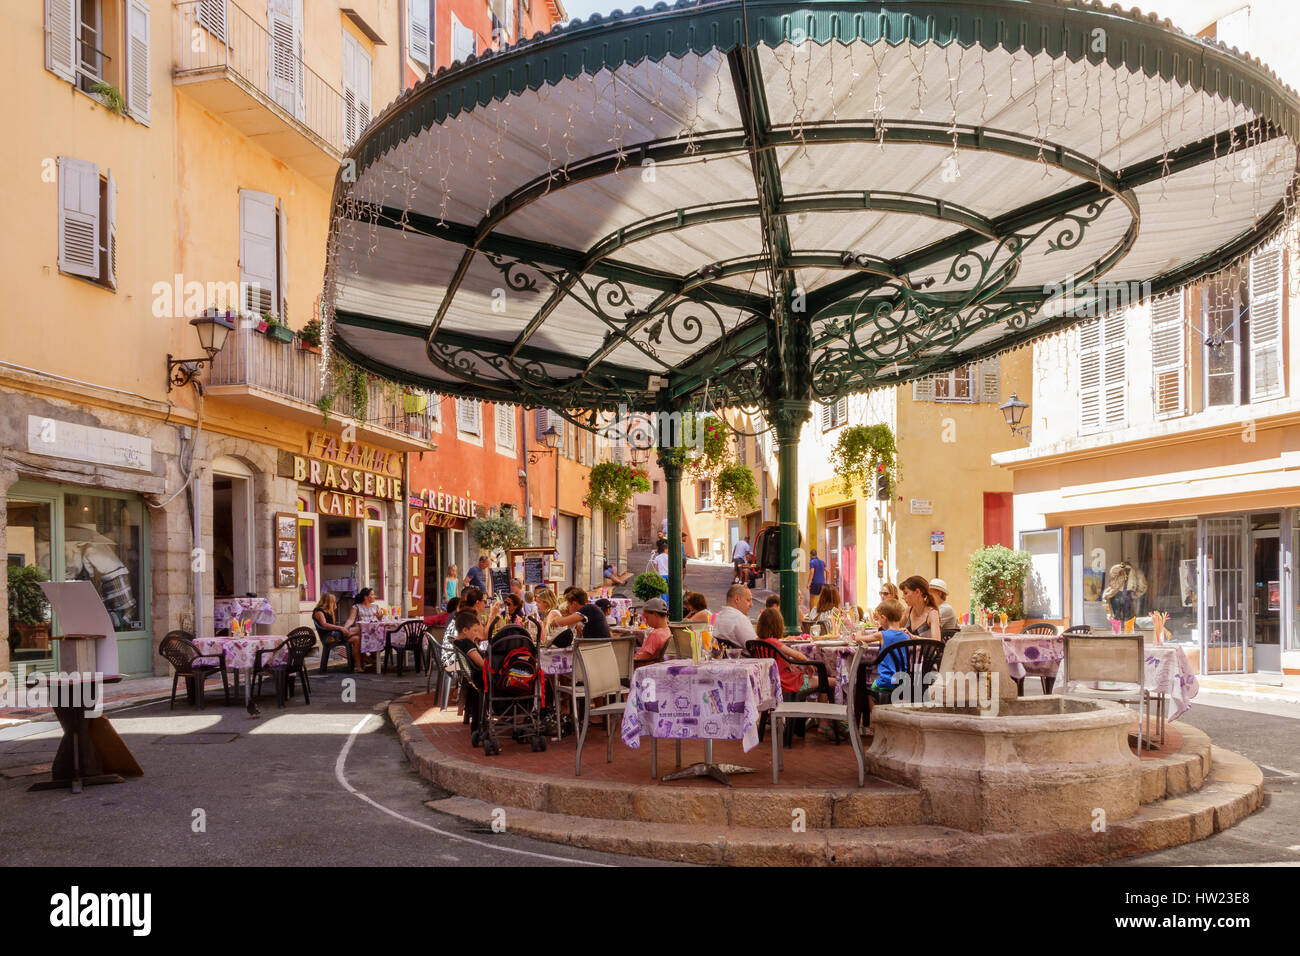 Families dining al-fresco under an ornate glass canopy in a historic square in Grasse, Provence, in the French Alps. Stock Photo